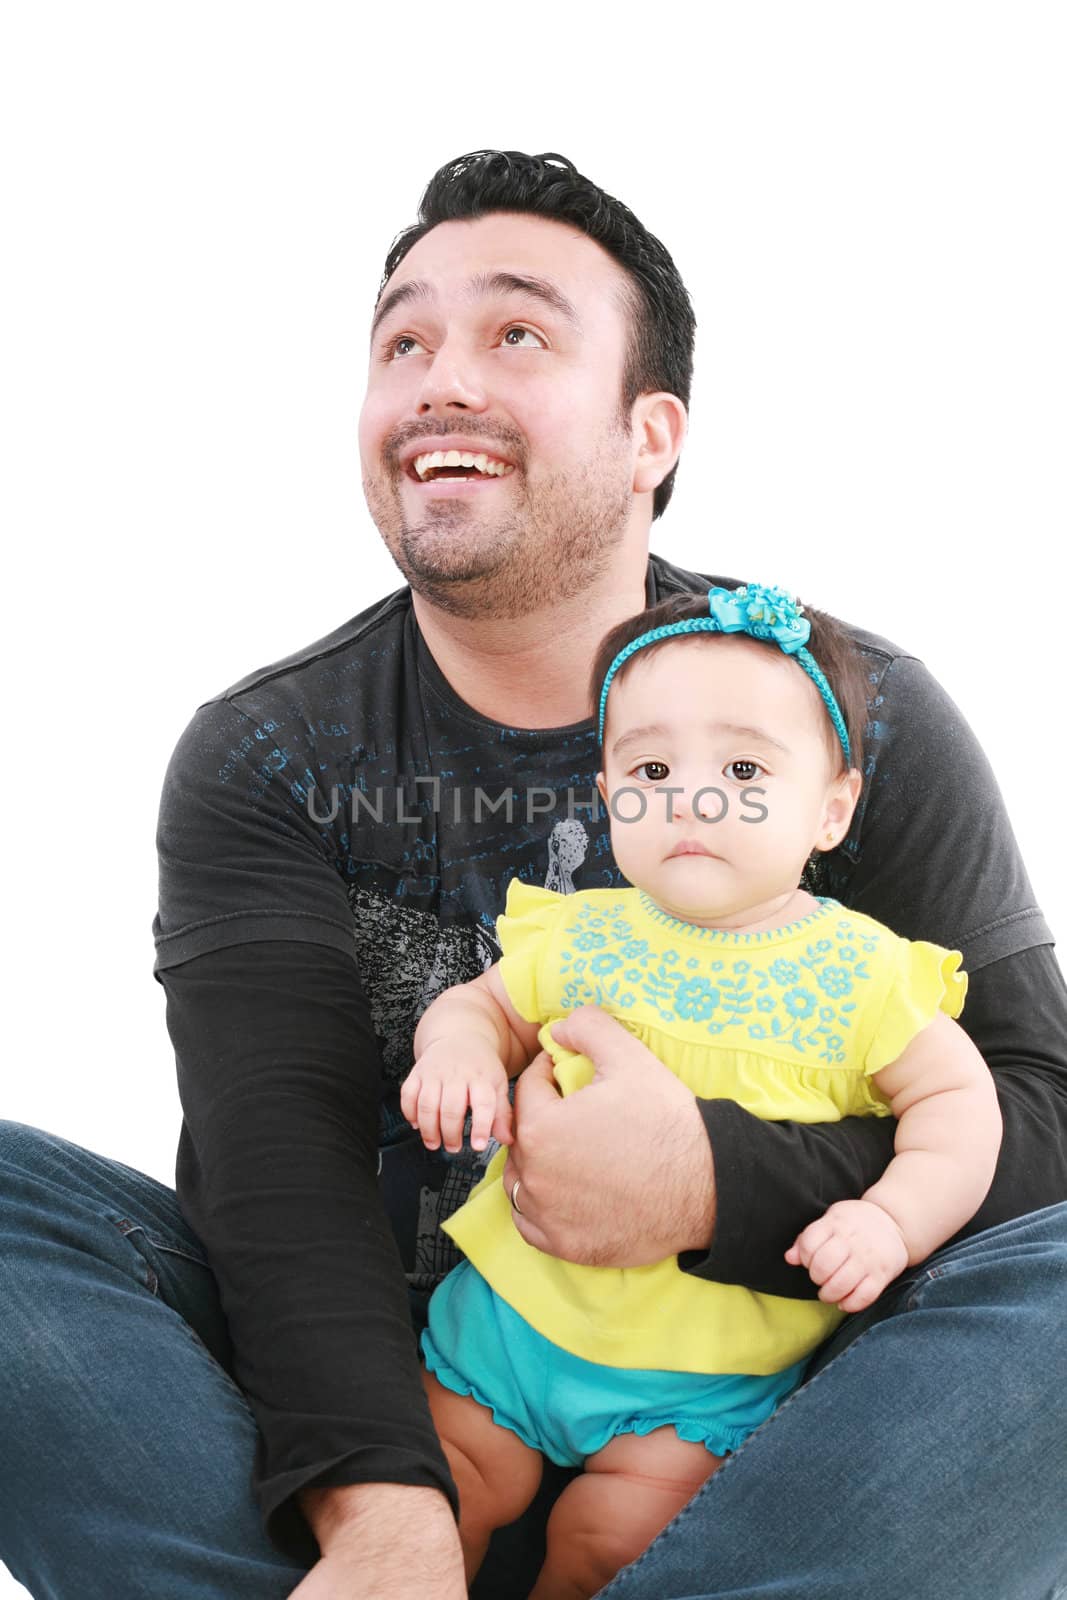 Happy and smiling baby and father. The baby 8 month old. Isolated on a white background.